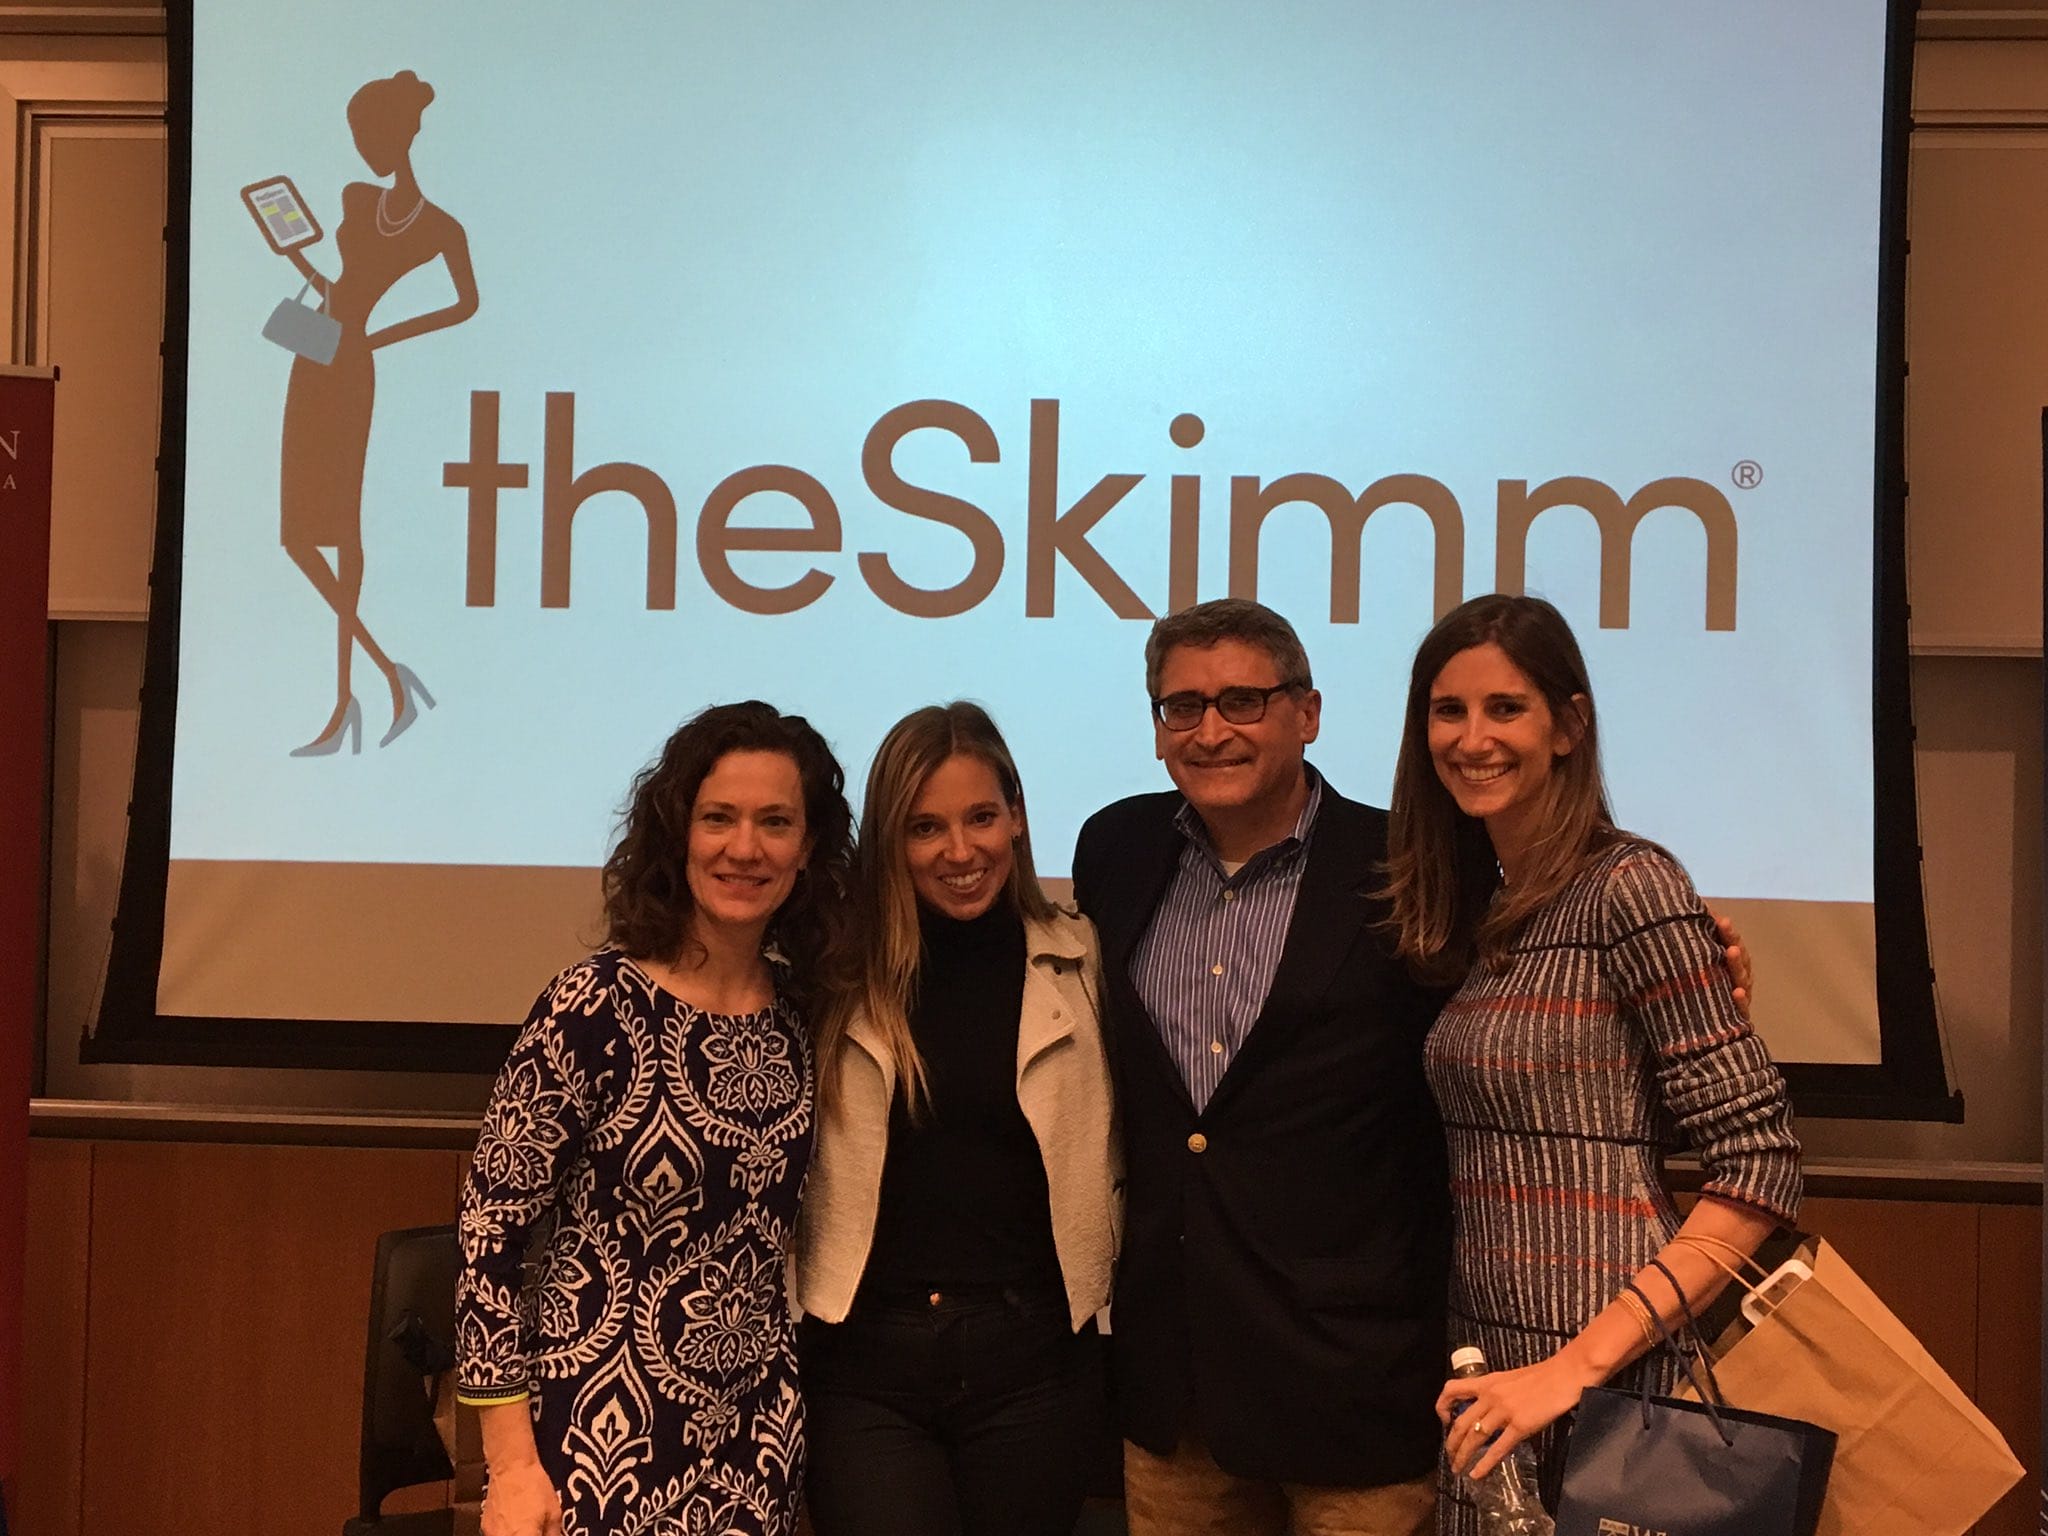 Left to right: Clare Leinweber, managing director of Penn Wharton Entrepreneurship; Danielle Weisberg; Ken Winneg, managing director of survey research at the Annenberg Public Policy Center; and Carly Zakin C08.